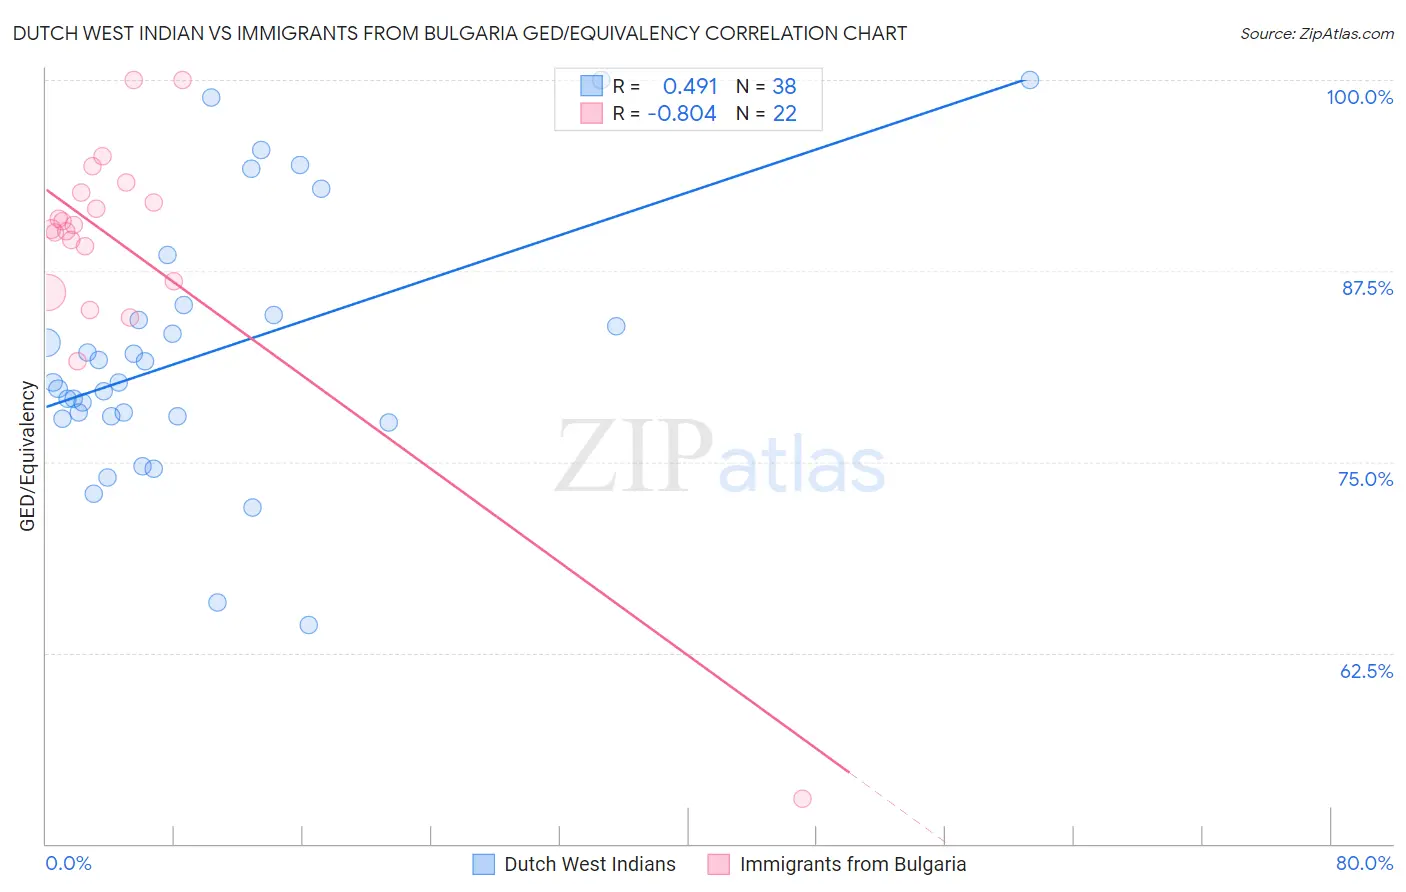 Dutch West Indian vs Immigrants from Bulgaria GED/Equivalency